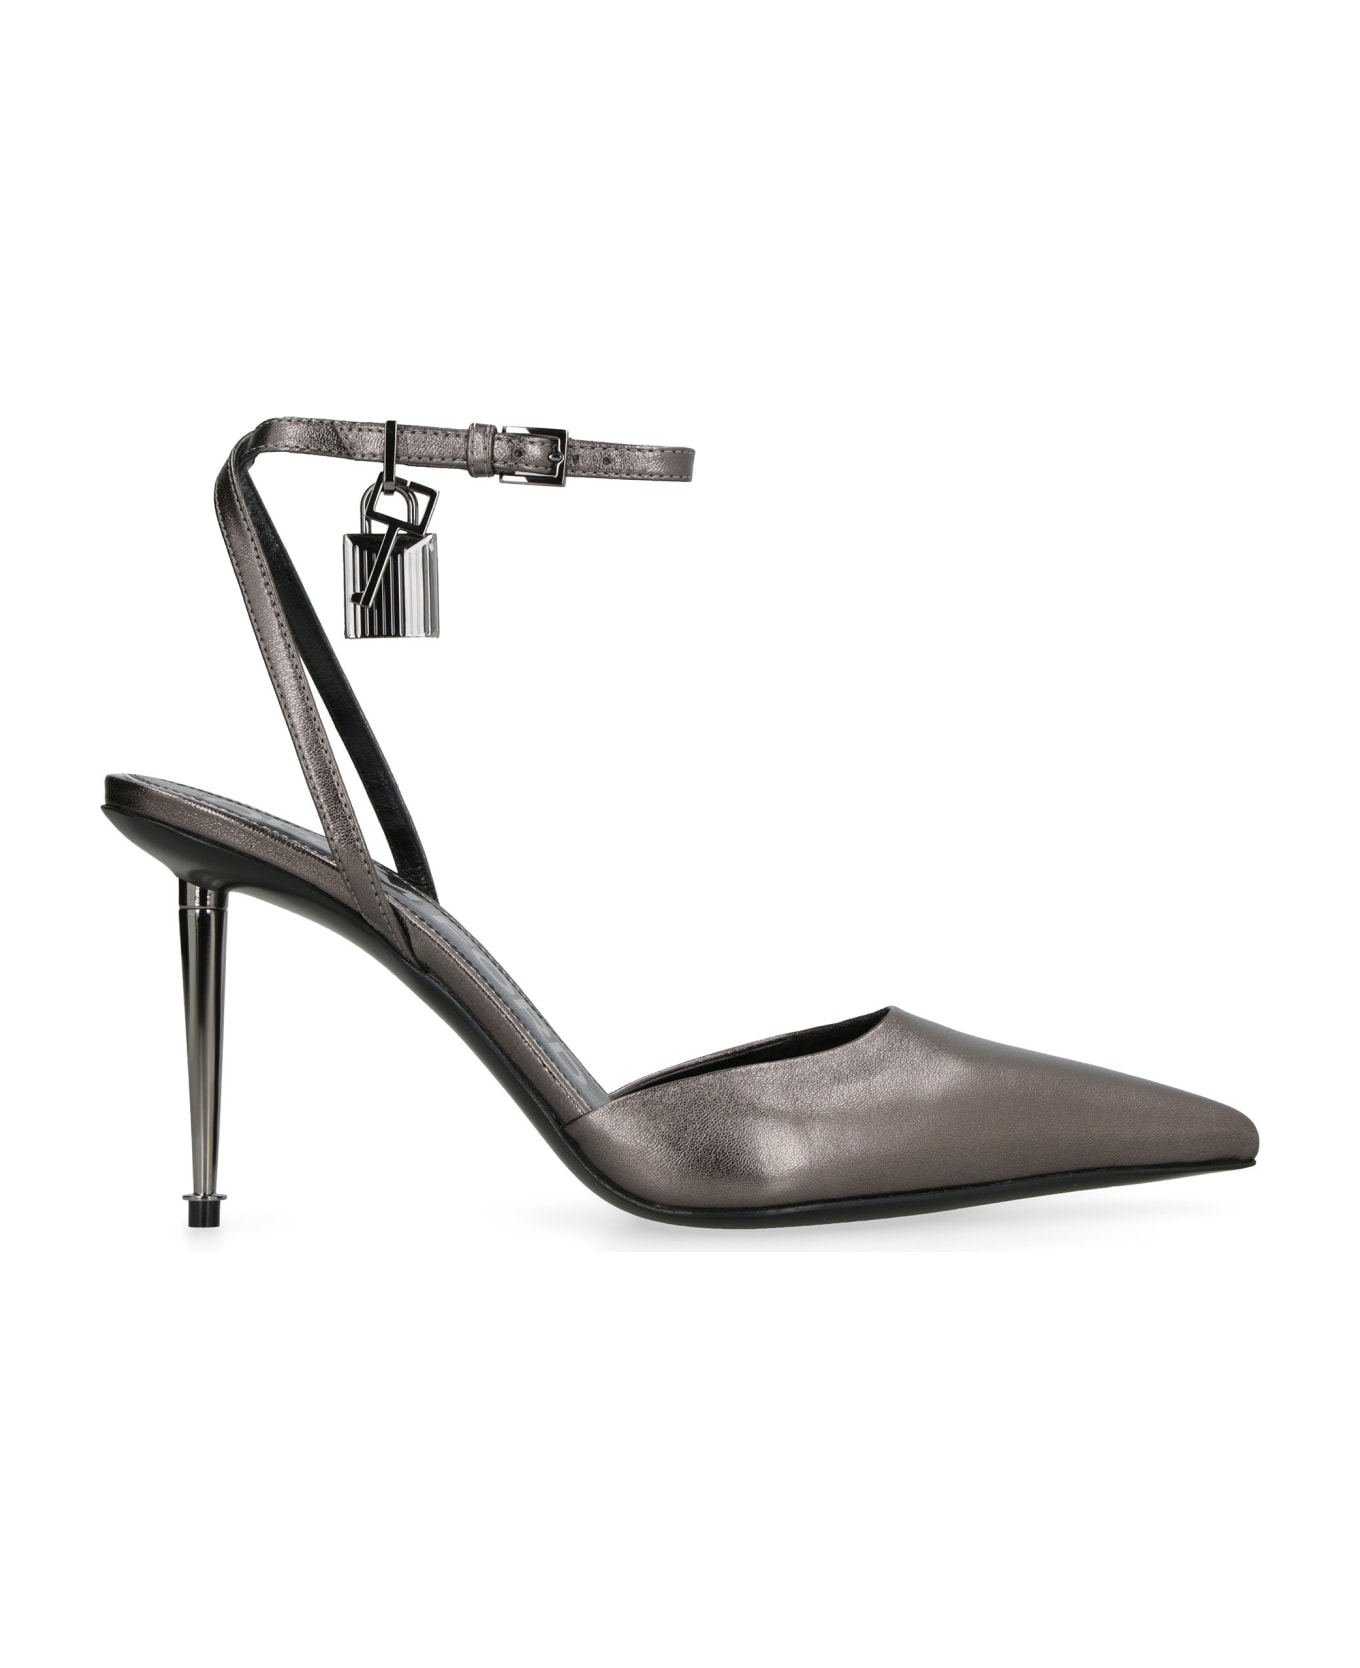 Tom Ford Padlock Leather Slingback Pumps - Silver